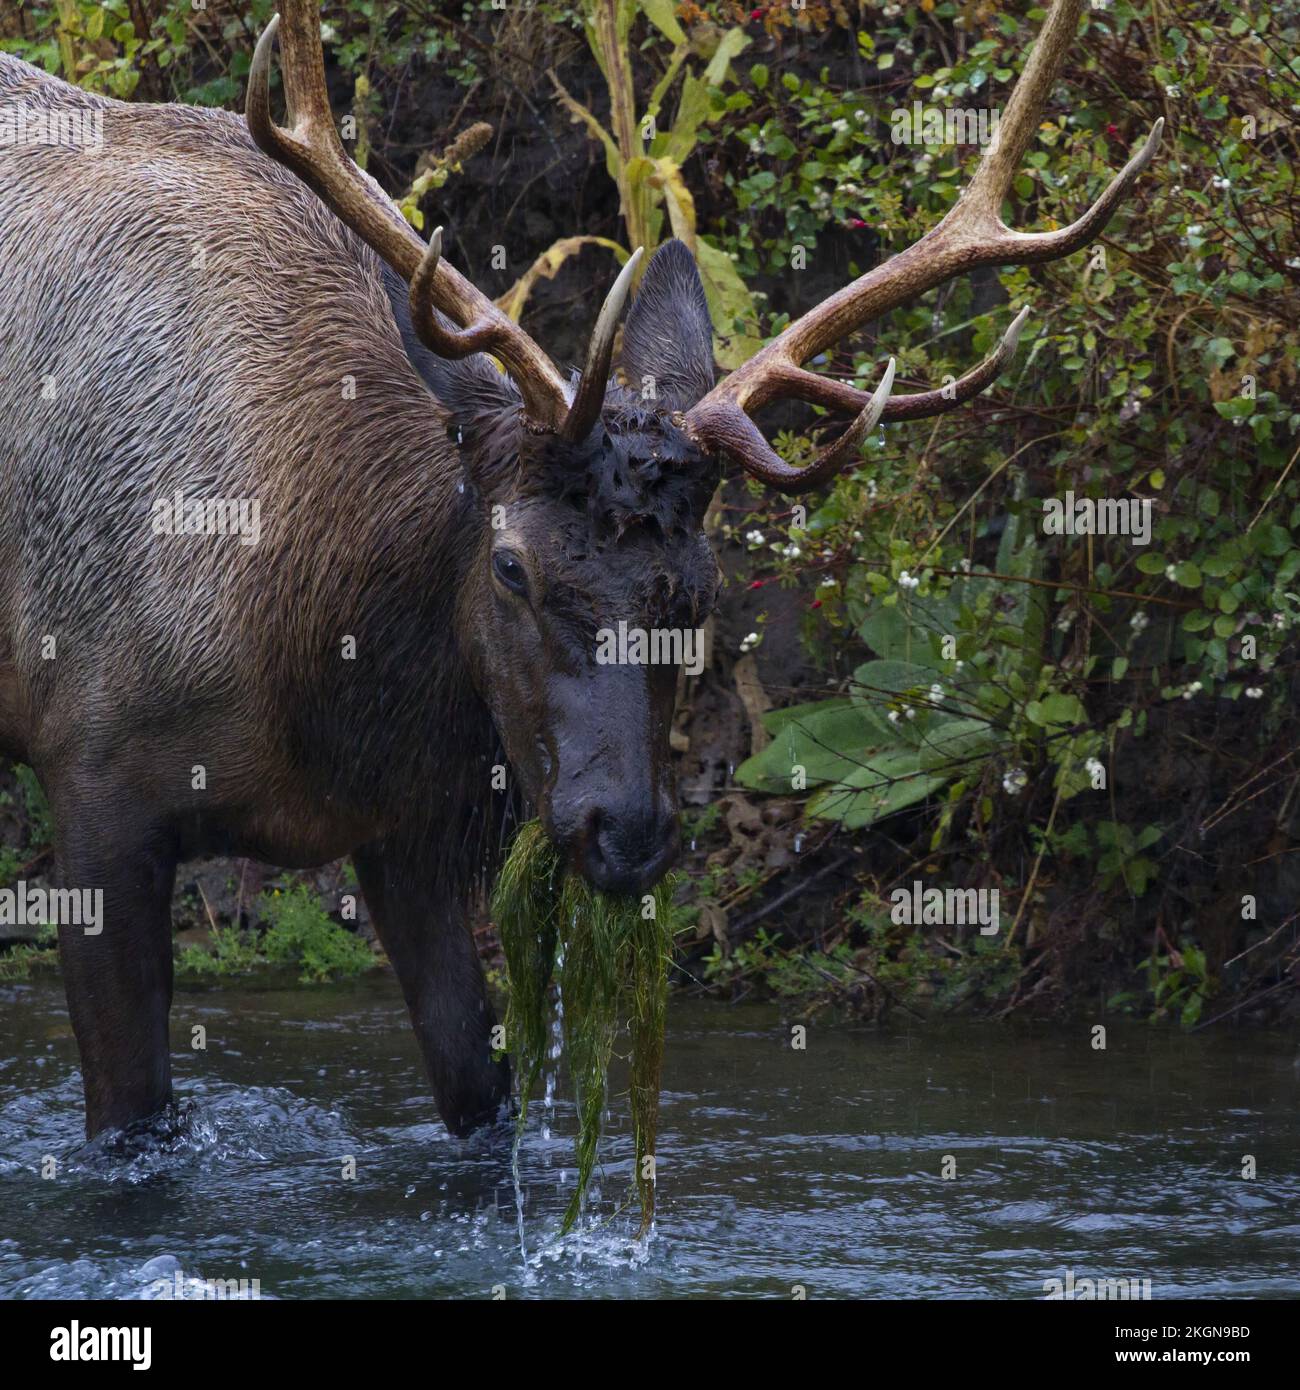 Bull elk enjoys eating aquatic vegetation with mouth filled with dripping underwater grasses of Flathead River at Bison Range Stock Photo